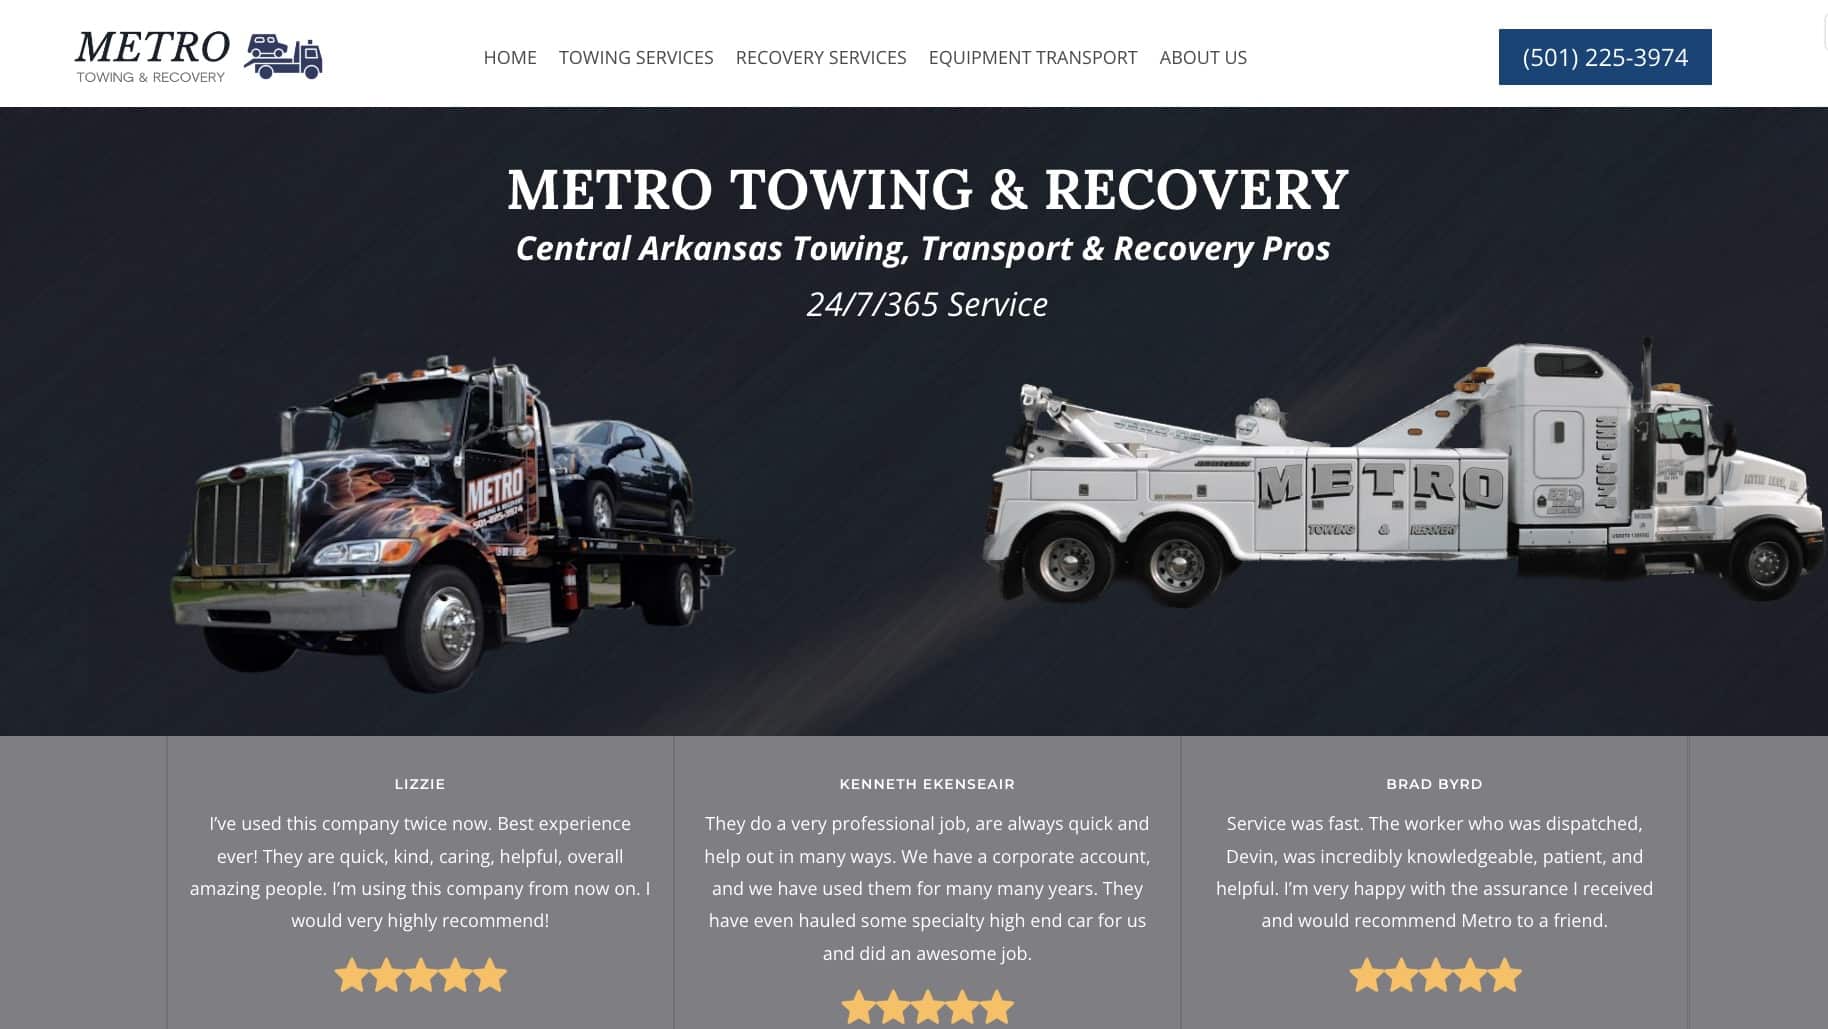 Metro Towing & Recovery in Little Rock Arkansas